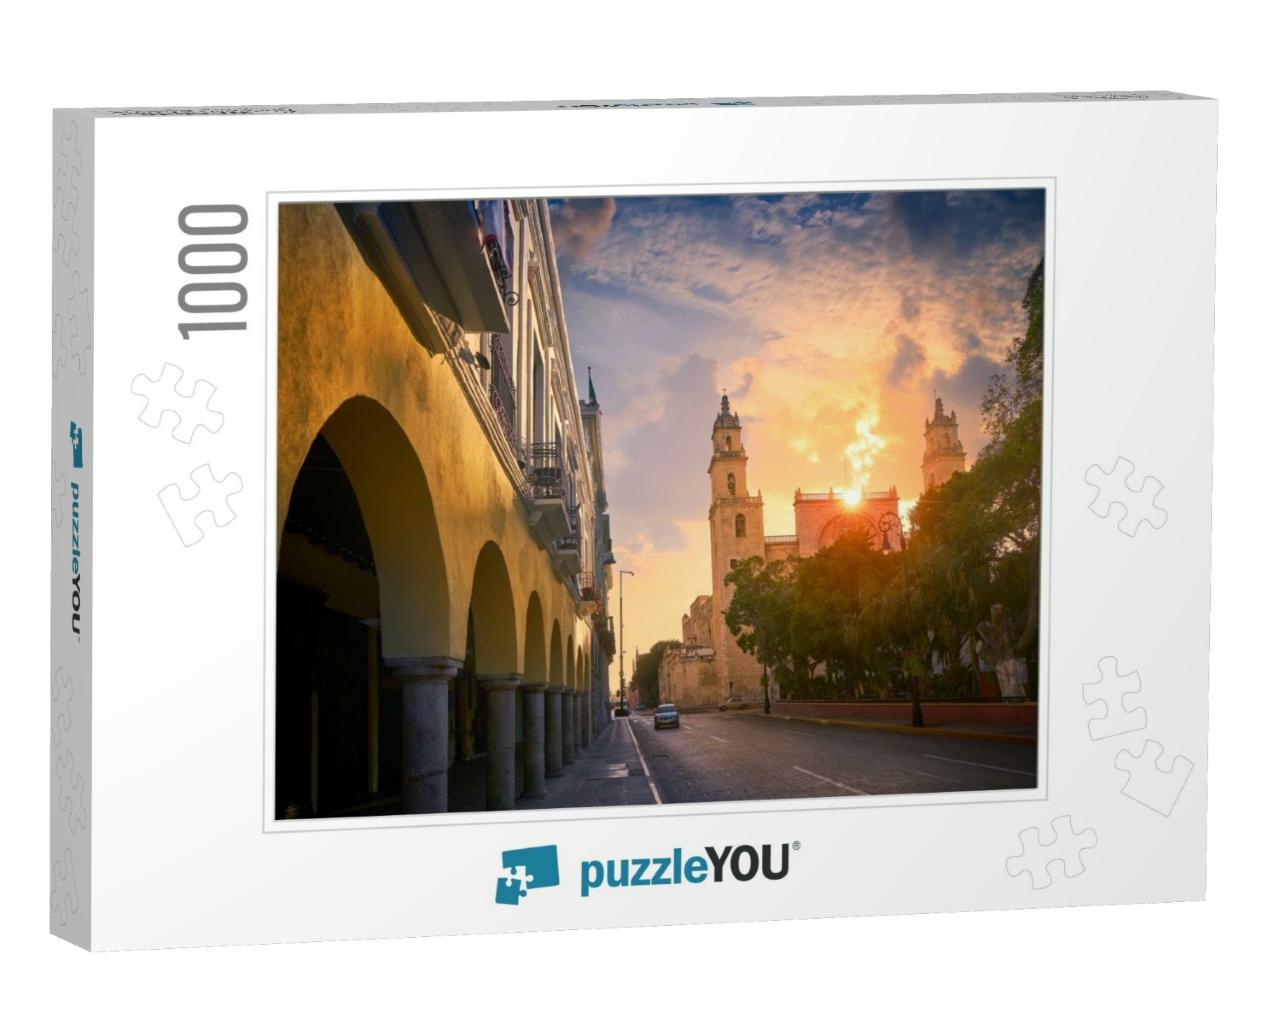 Merida San Idefonso Cathedral Sunrise in Yucatan Mexico... Jigsaw Puzzle with 1000 pieces